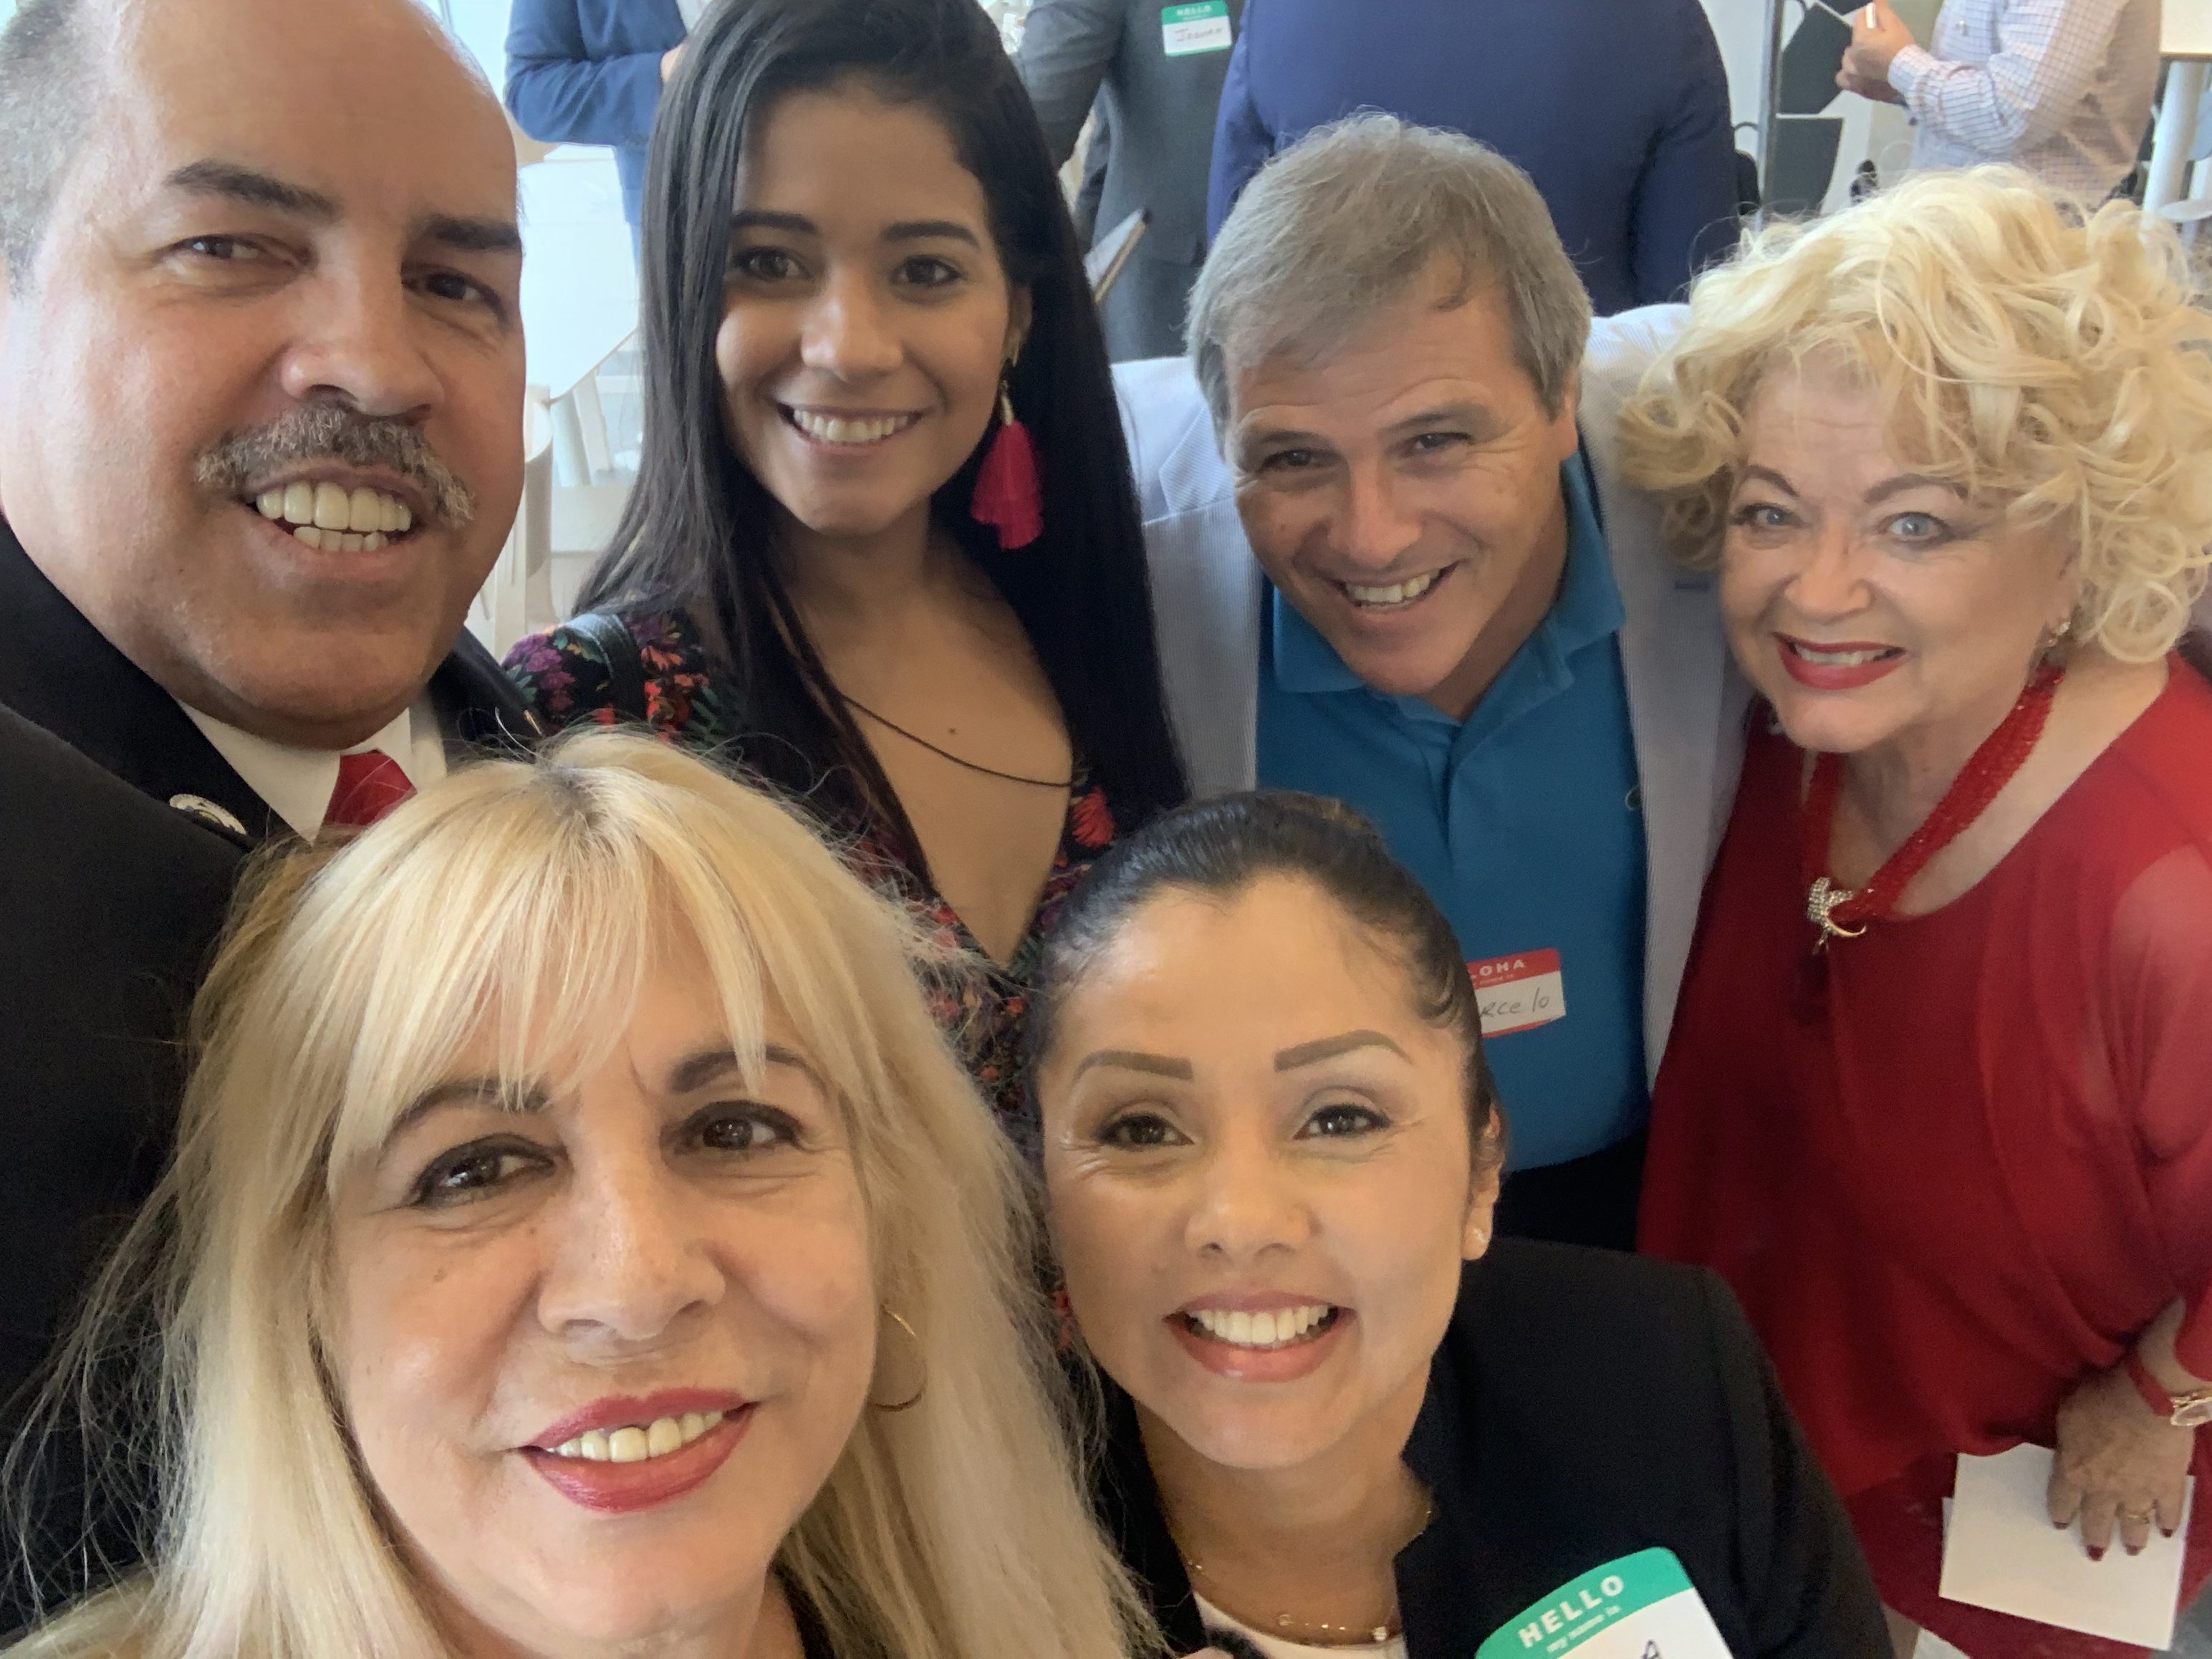 Doral Chamber of Commerce IKEA Speed Networking Event, selfie group photo with DCC Members at the IKEA event.